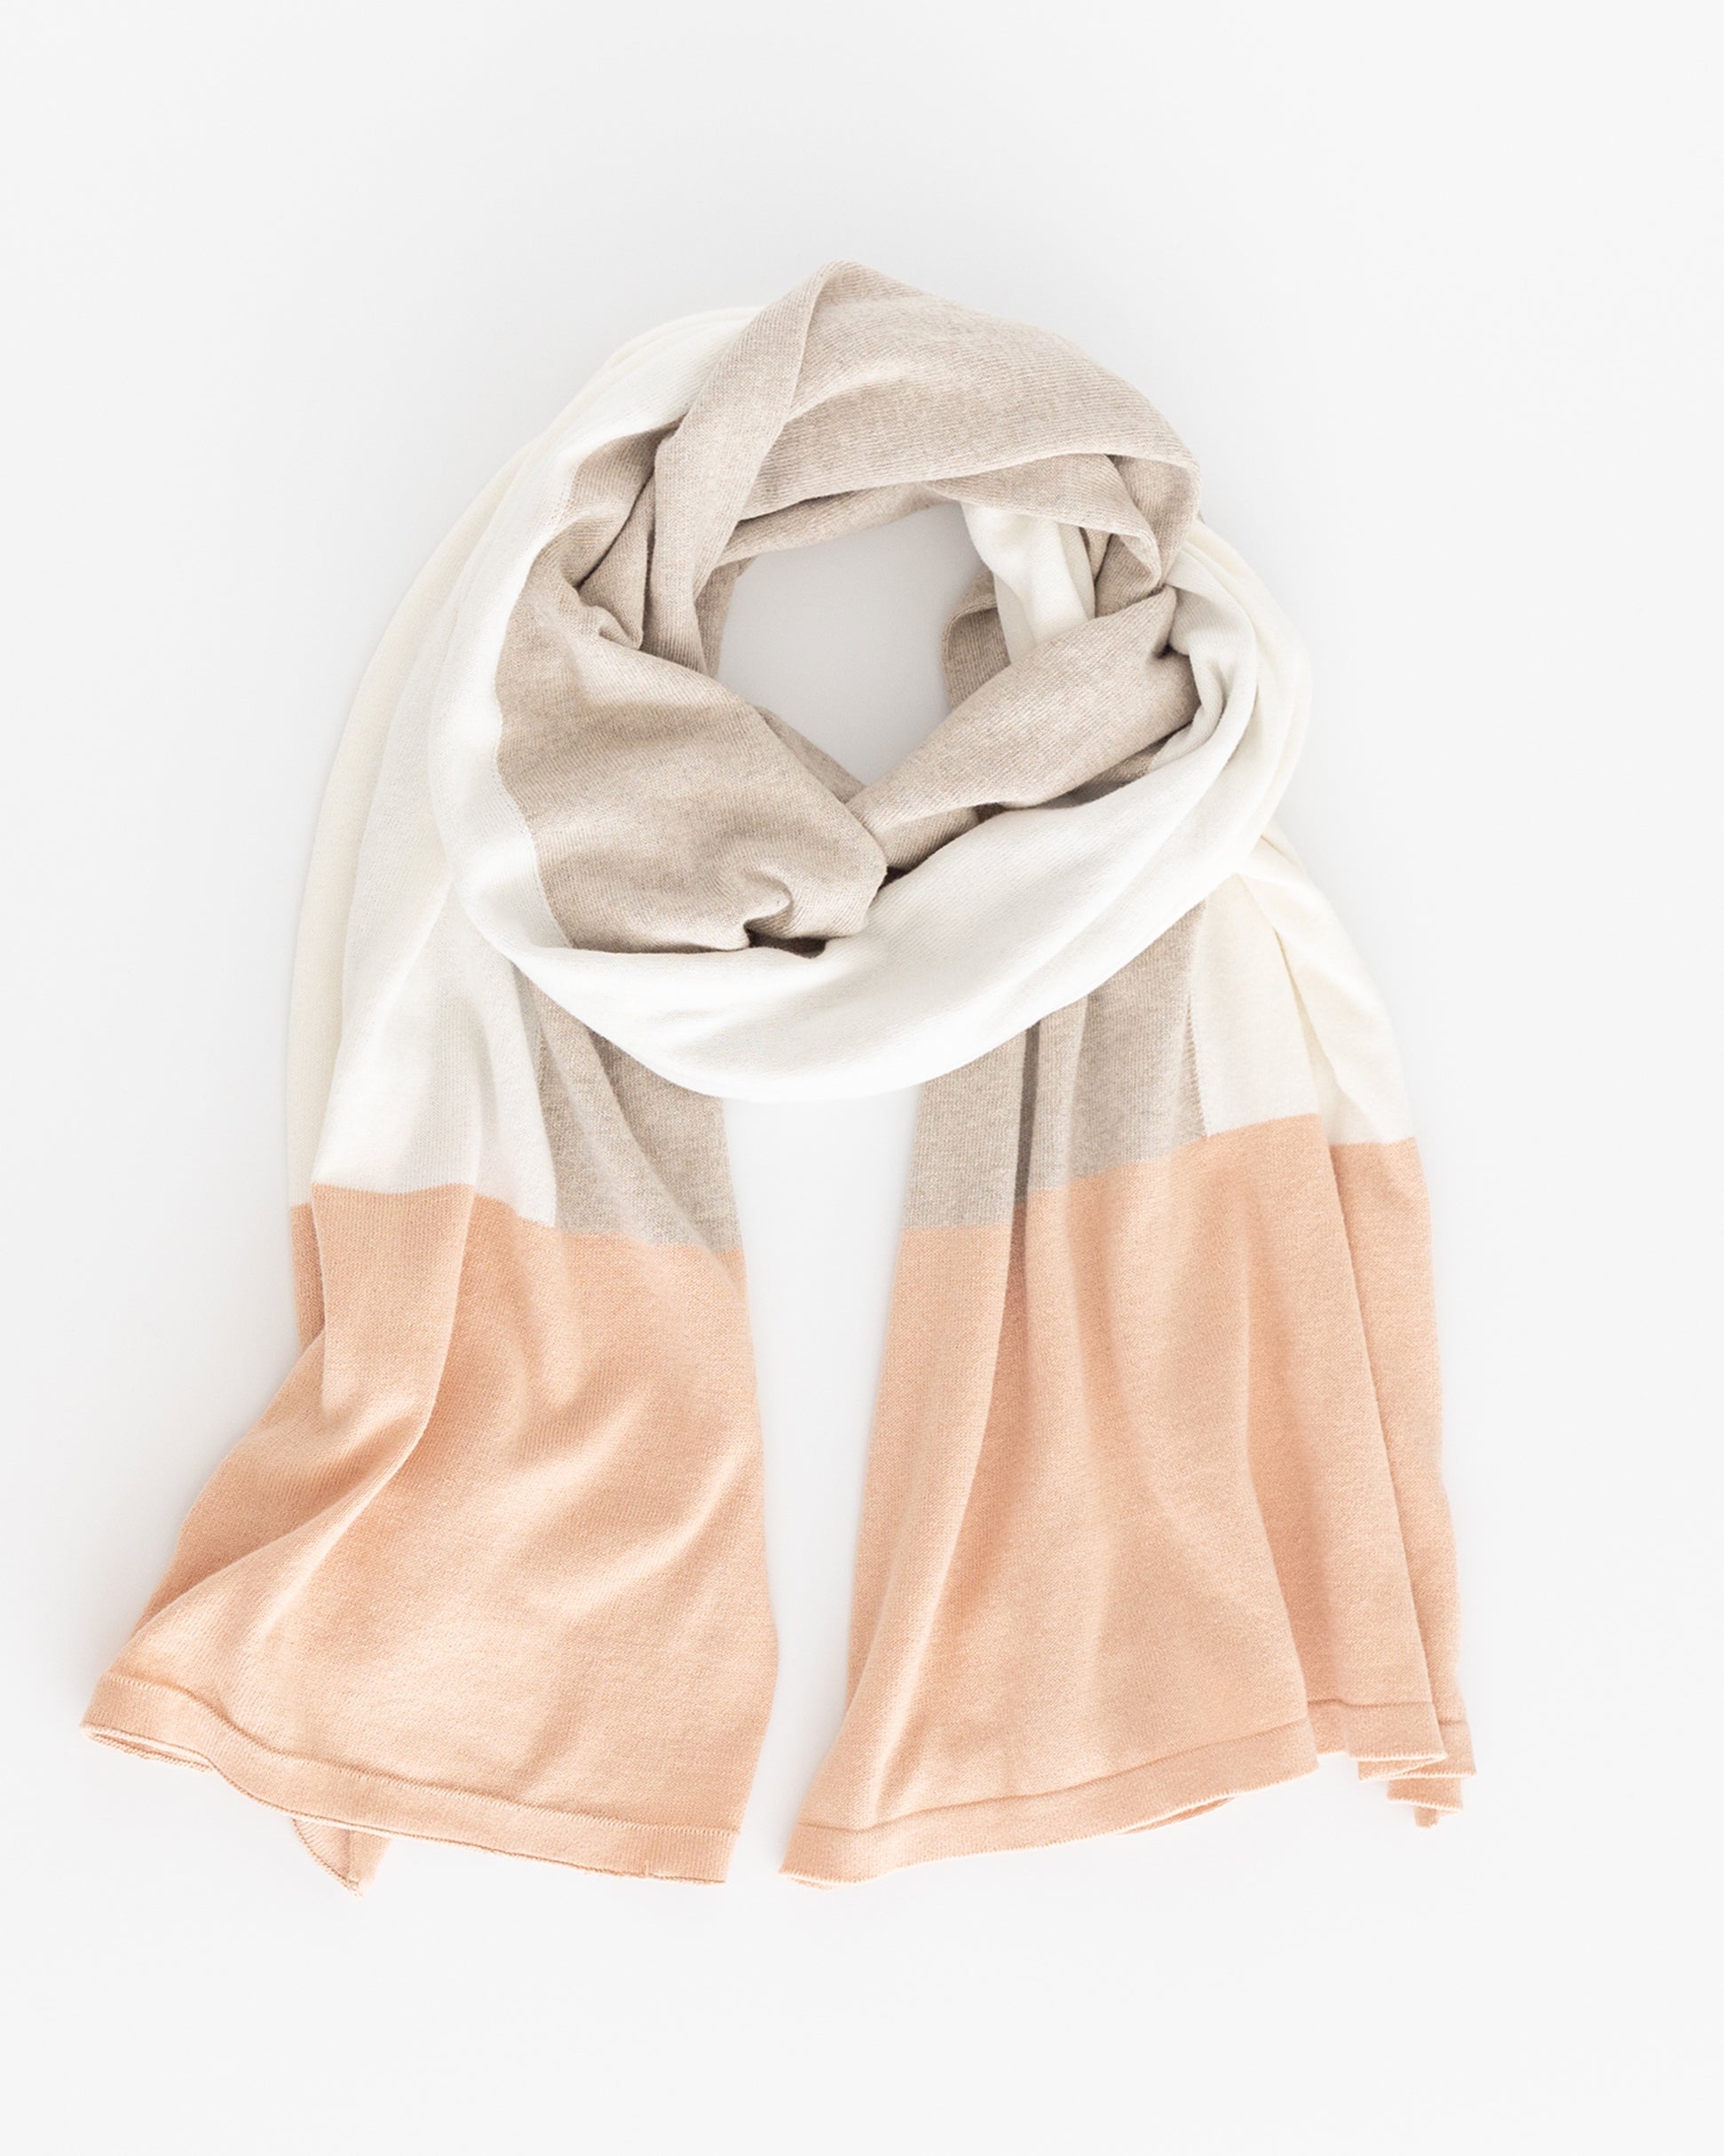 The Dreamsoft Travel Scarf in Blush Colorblock which is a pink, tan and cream scarf